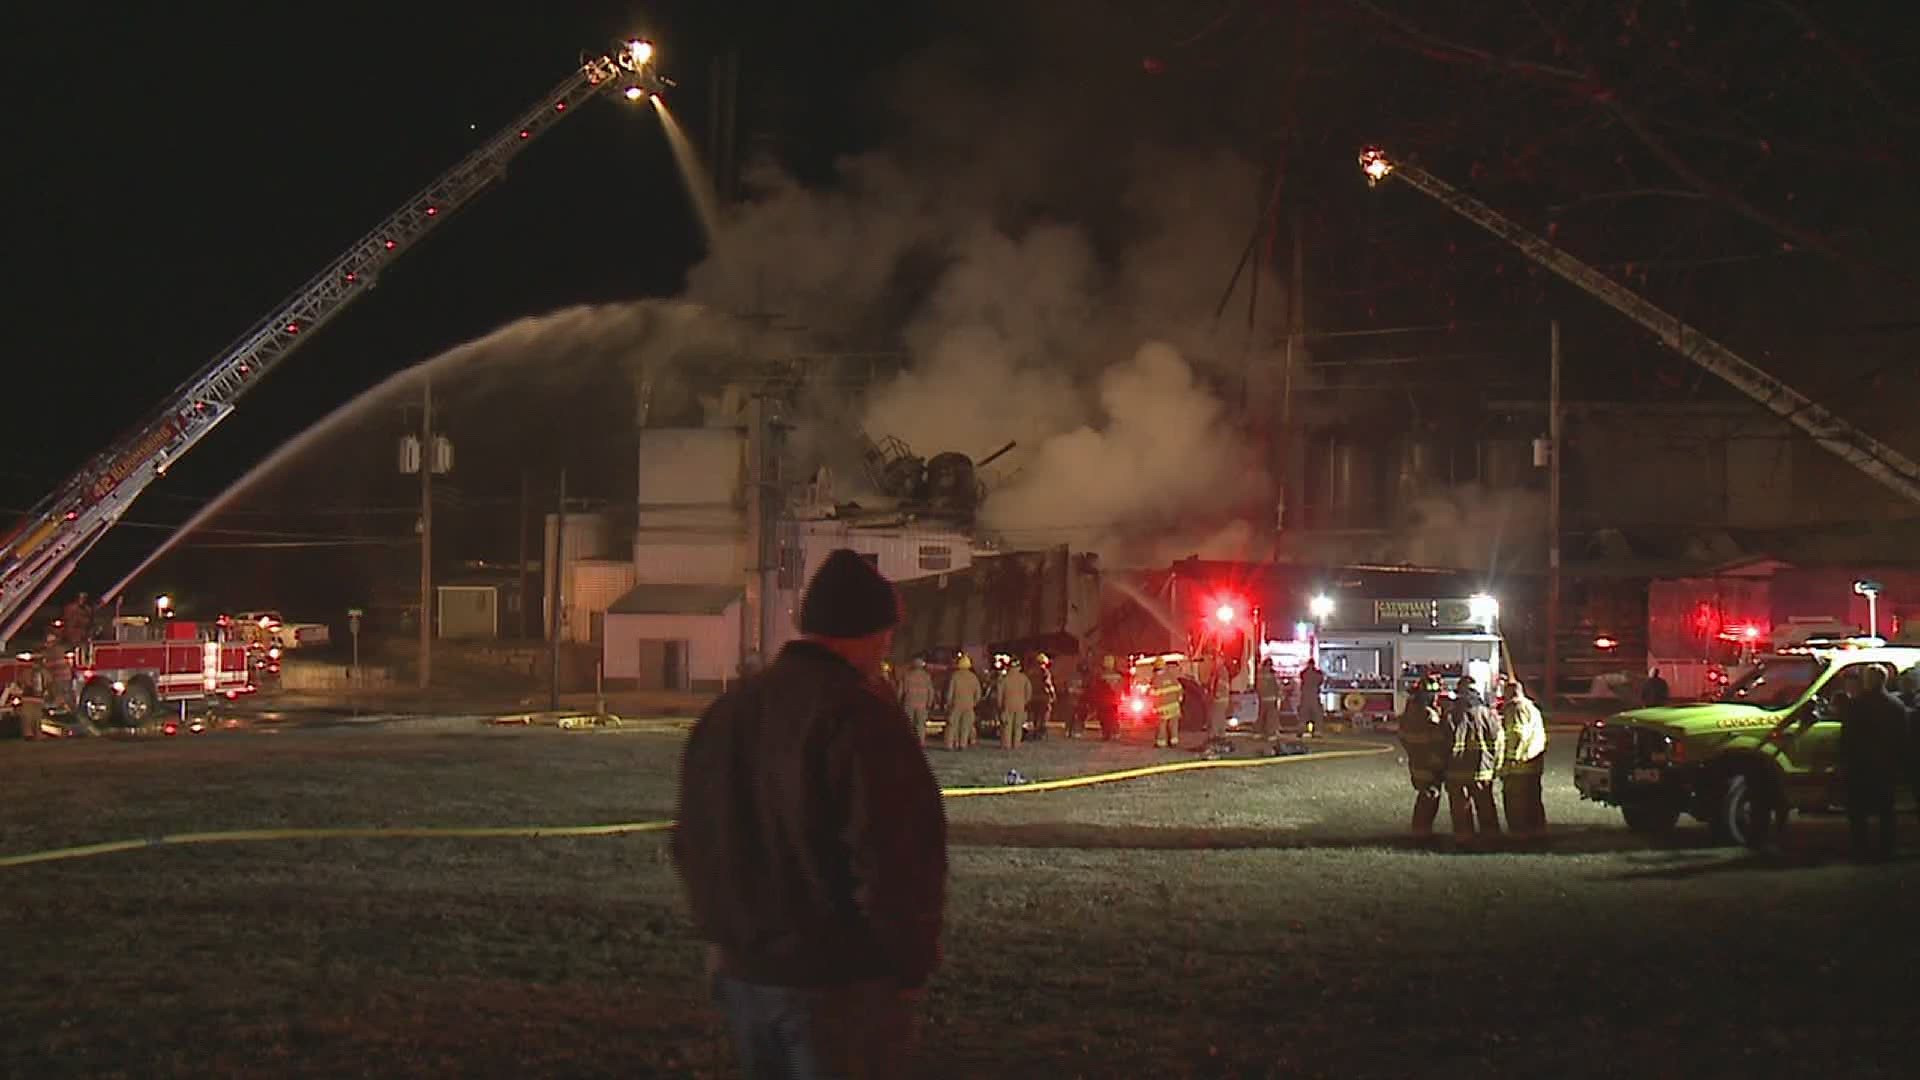 Melick Aqua Feed went up in flames at 6 p.m. Saturday.